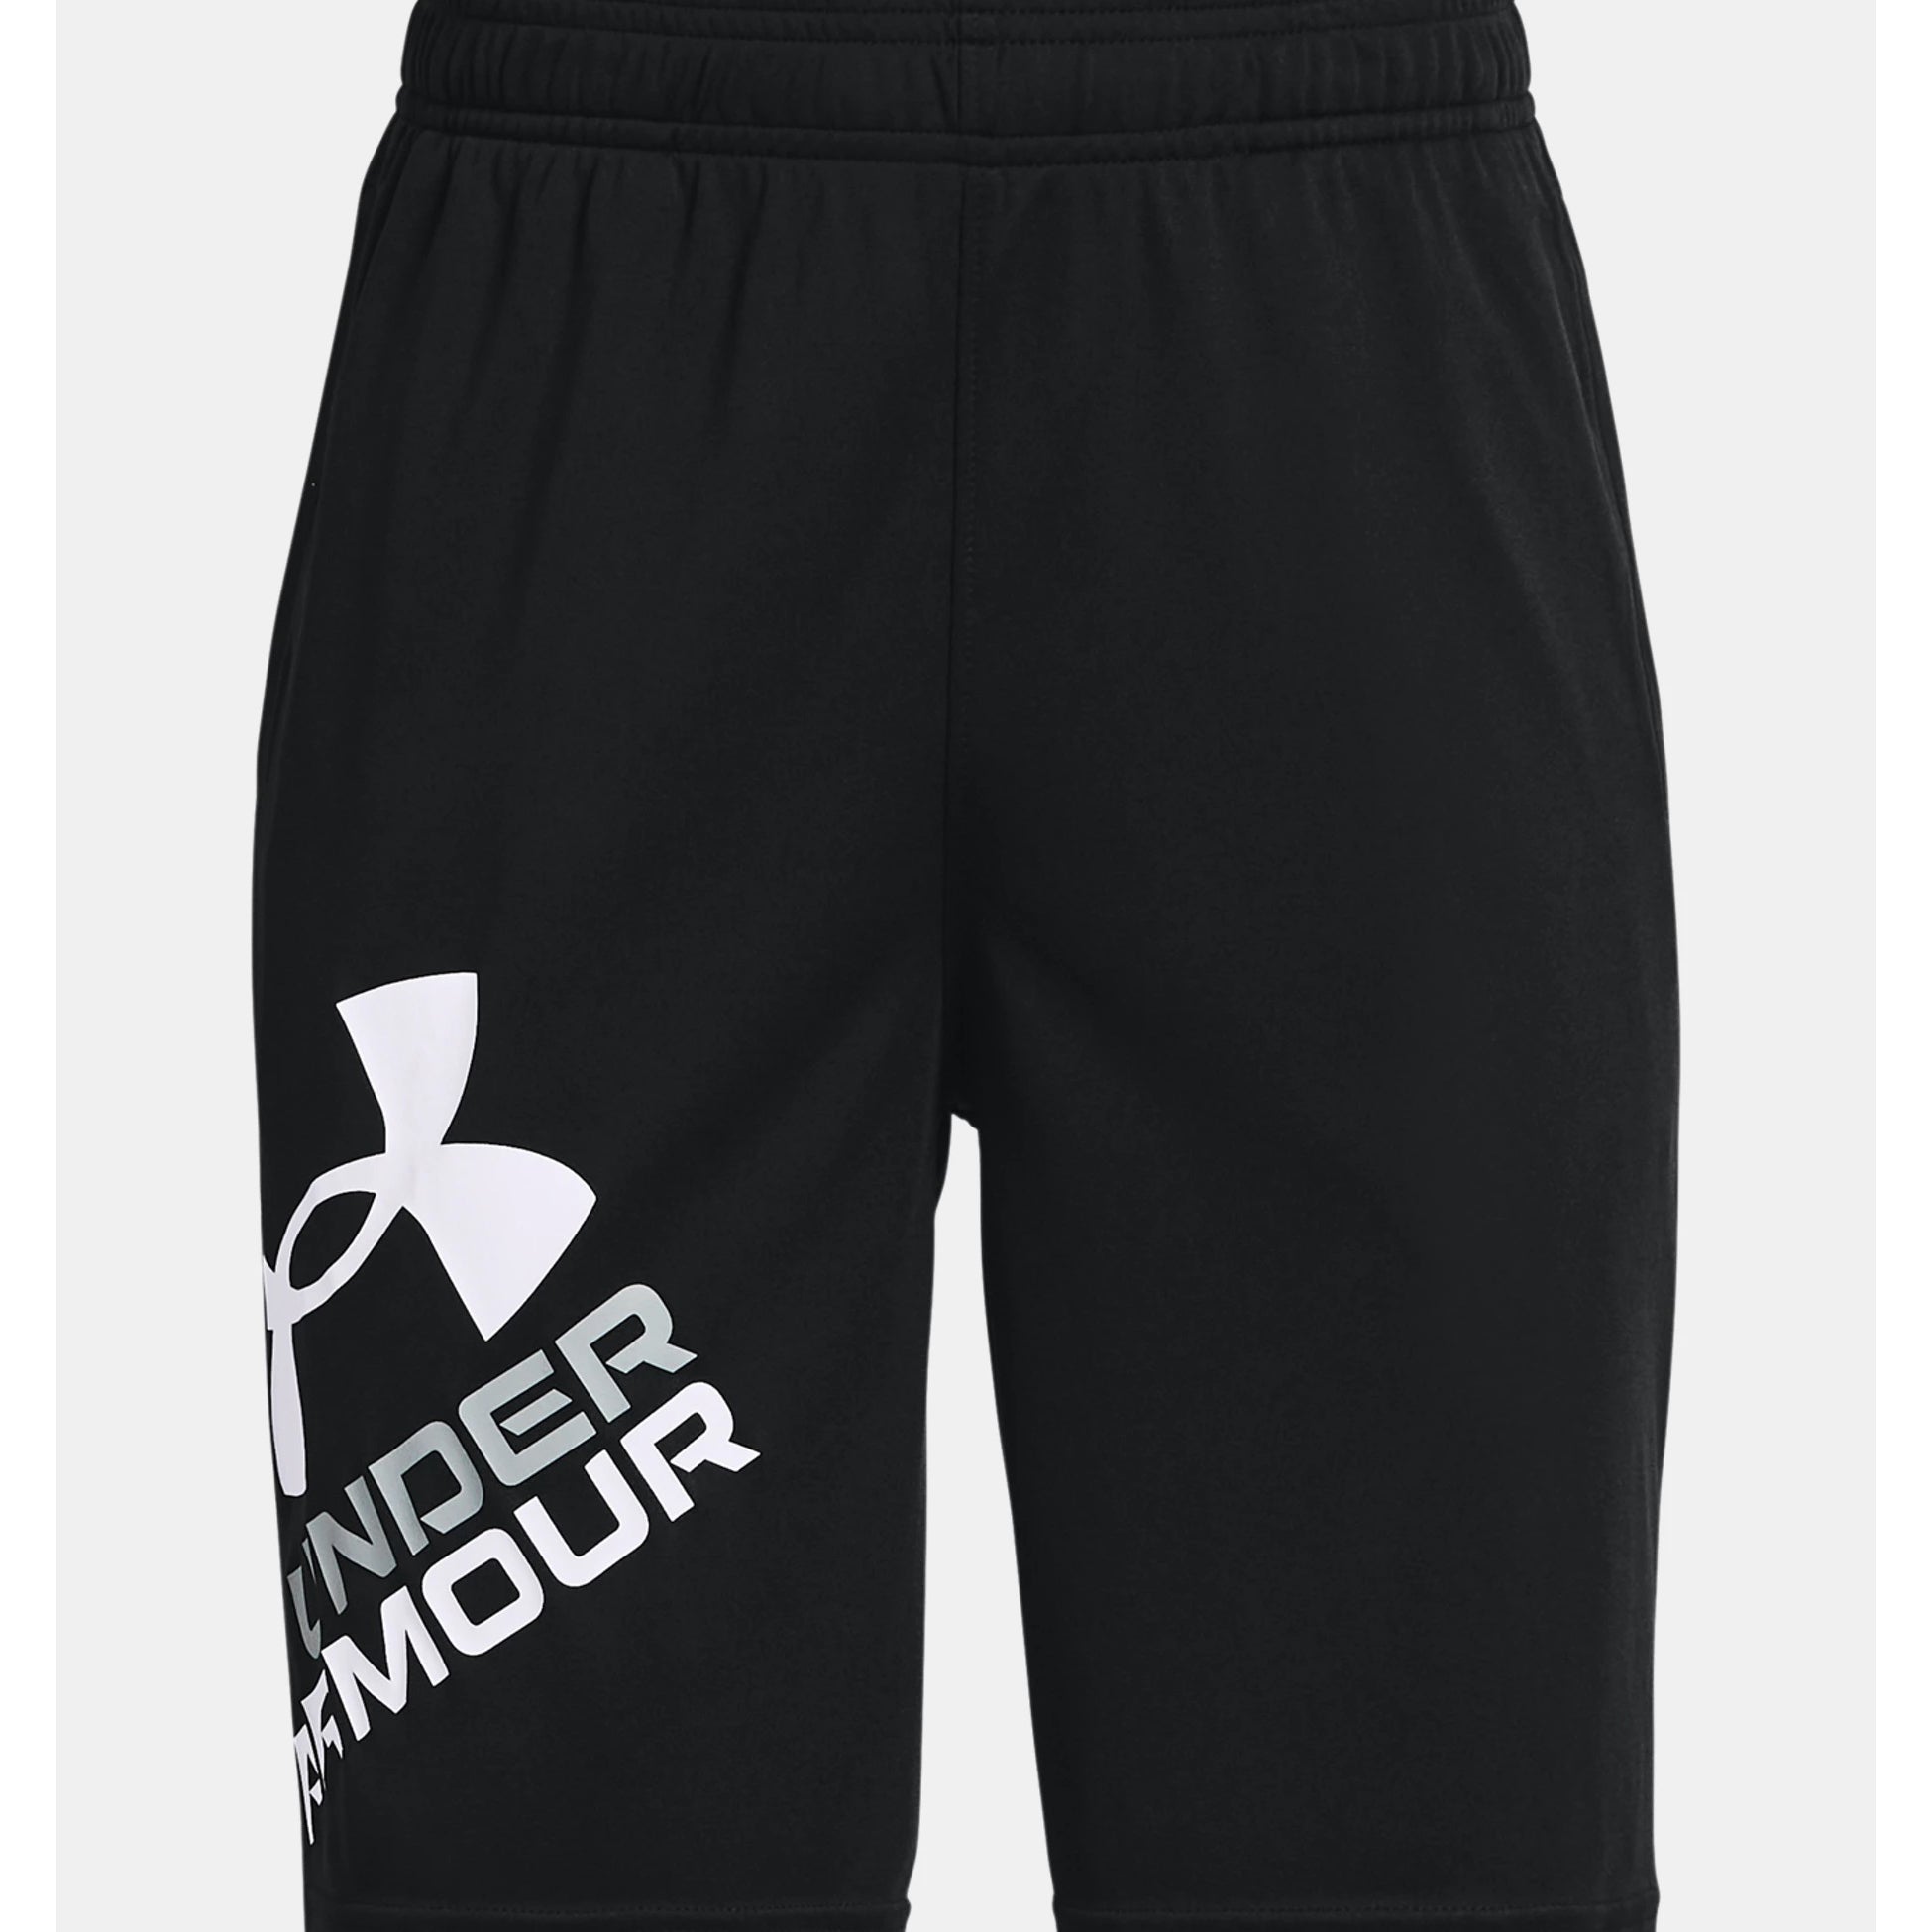 Under Armour Youth UA Logo Shorts 1361817 – Good's Store Online